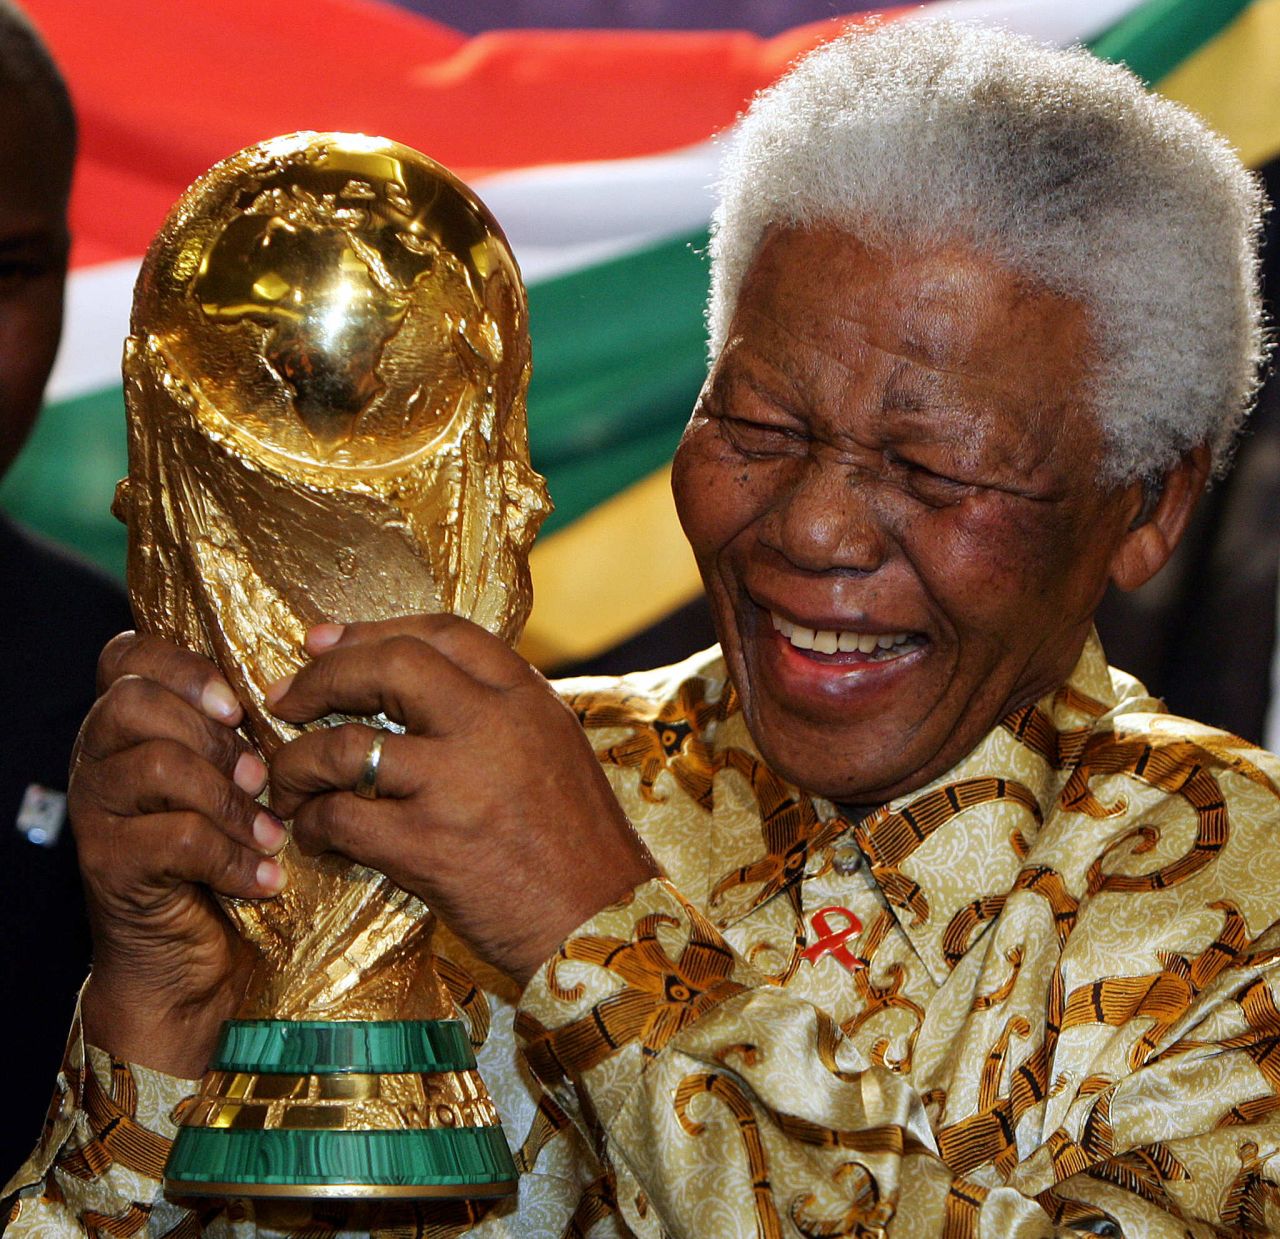 South Africa was awarded the right to stage the 2010 World Cup in 2004. It was a moment of great joy for former South African president Mandela.